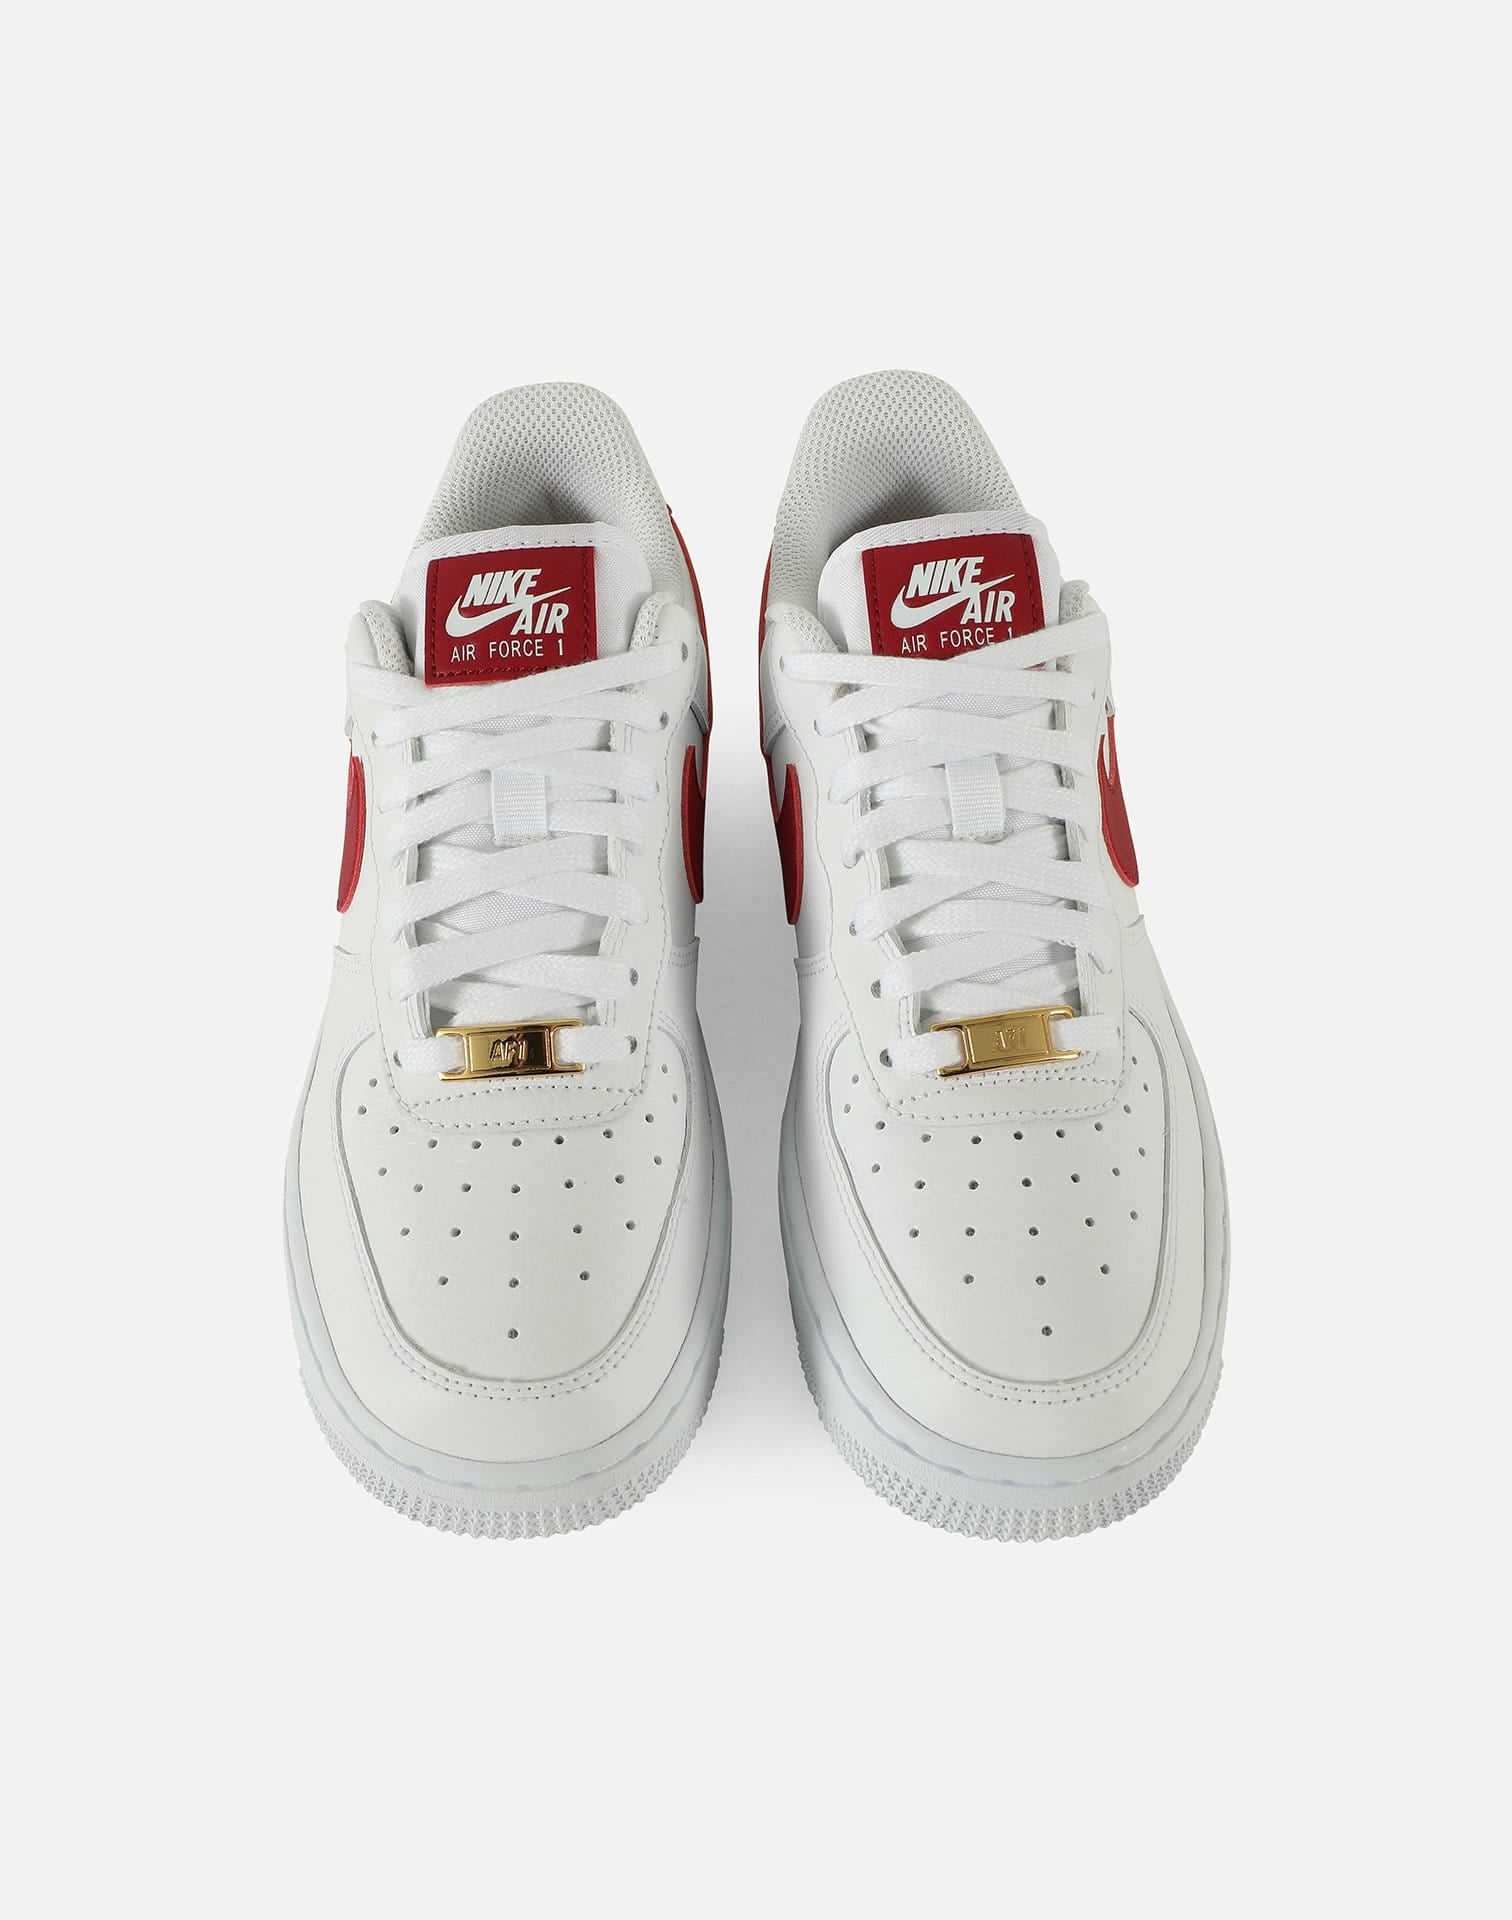 dtlr air forces